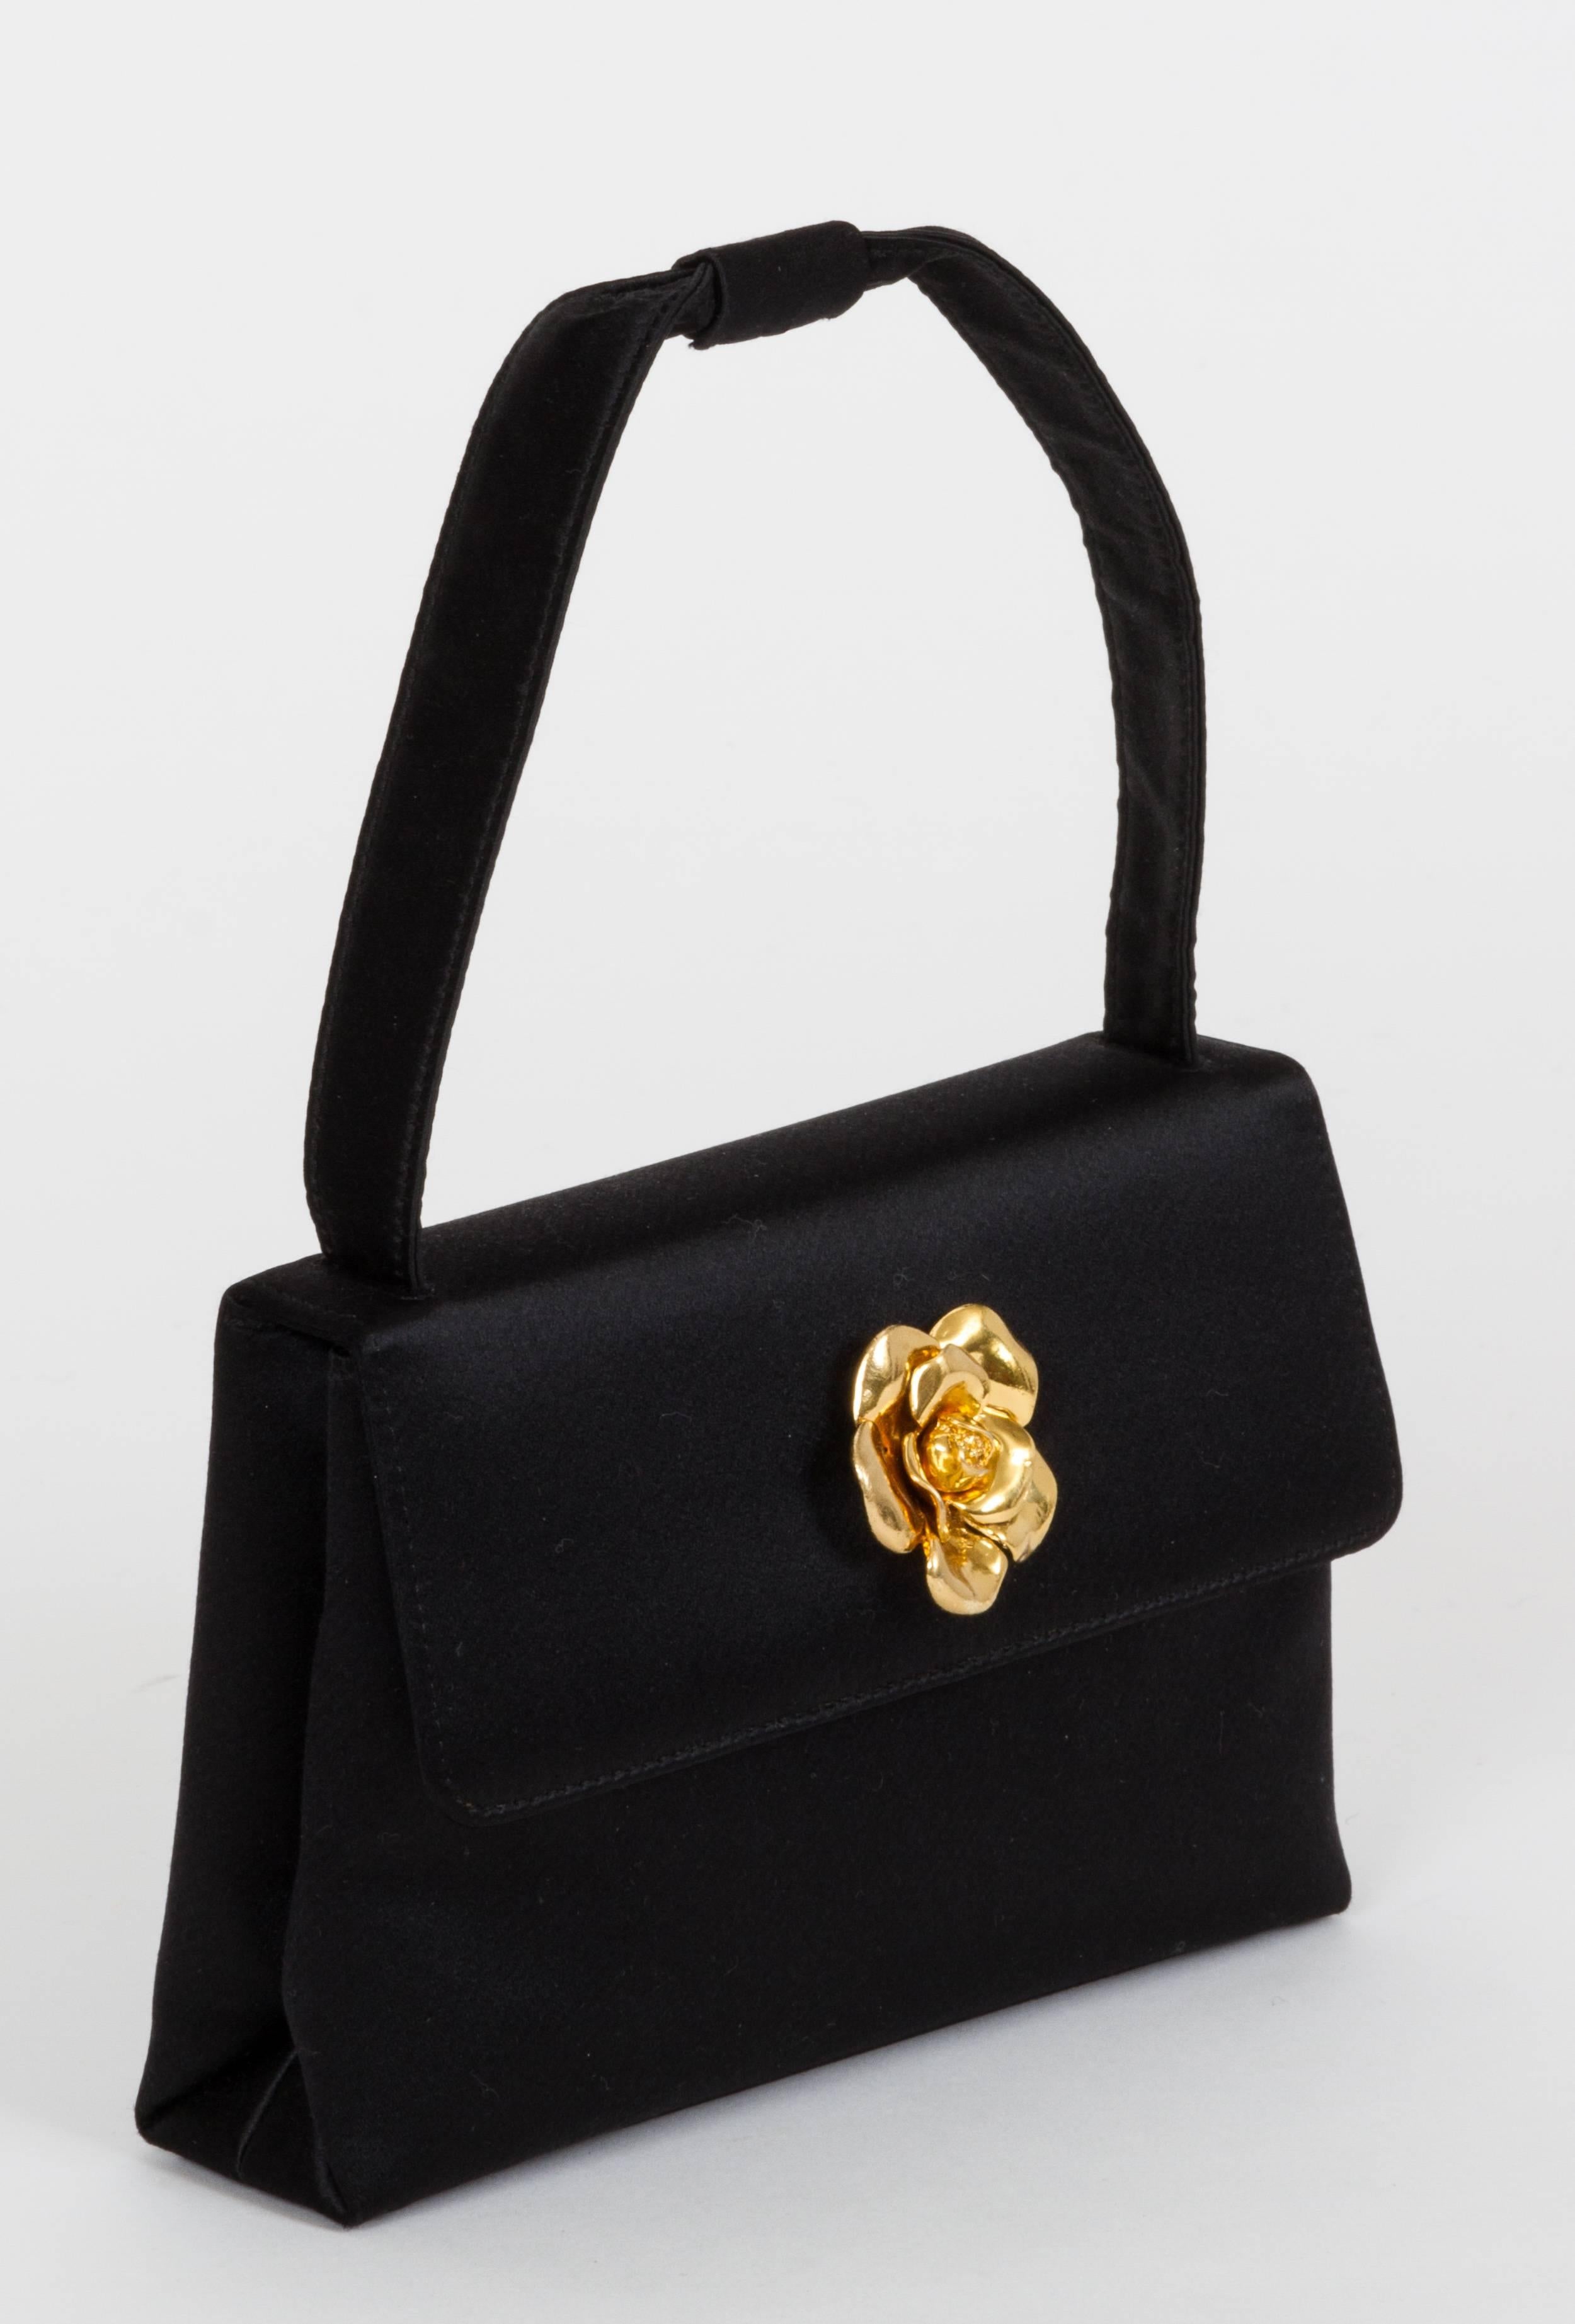 Chanel black satin silk evening bag with gold camellia detail, early 1990s. Handle drop, 5